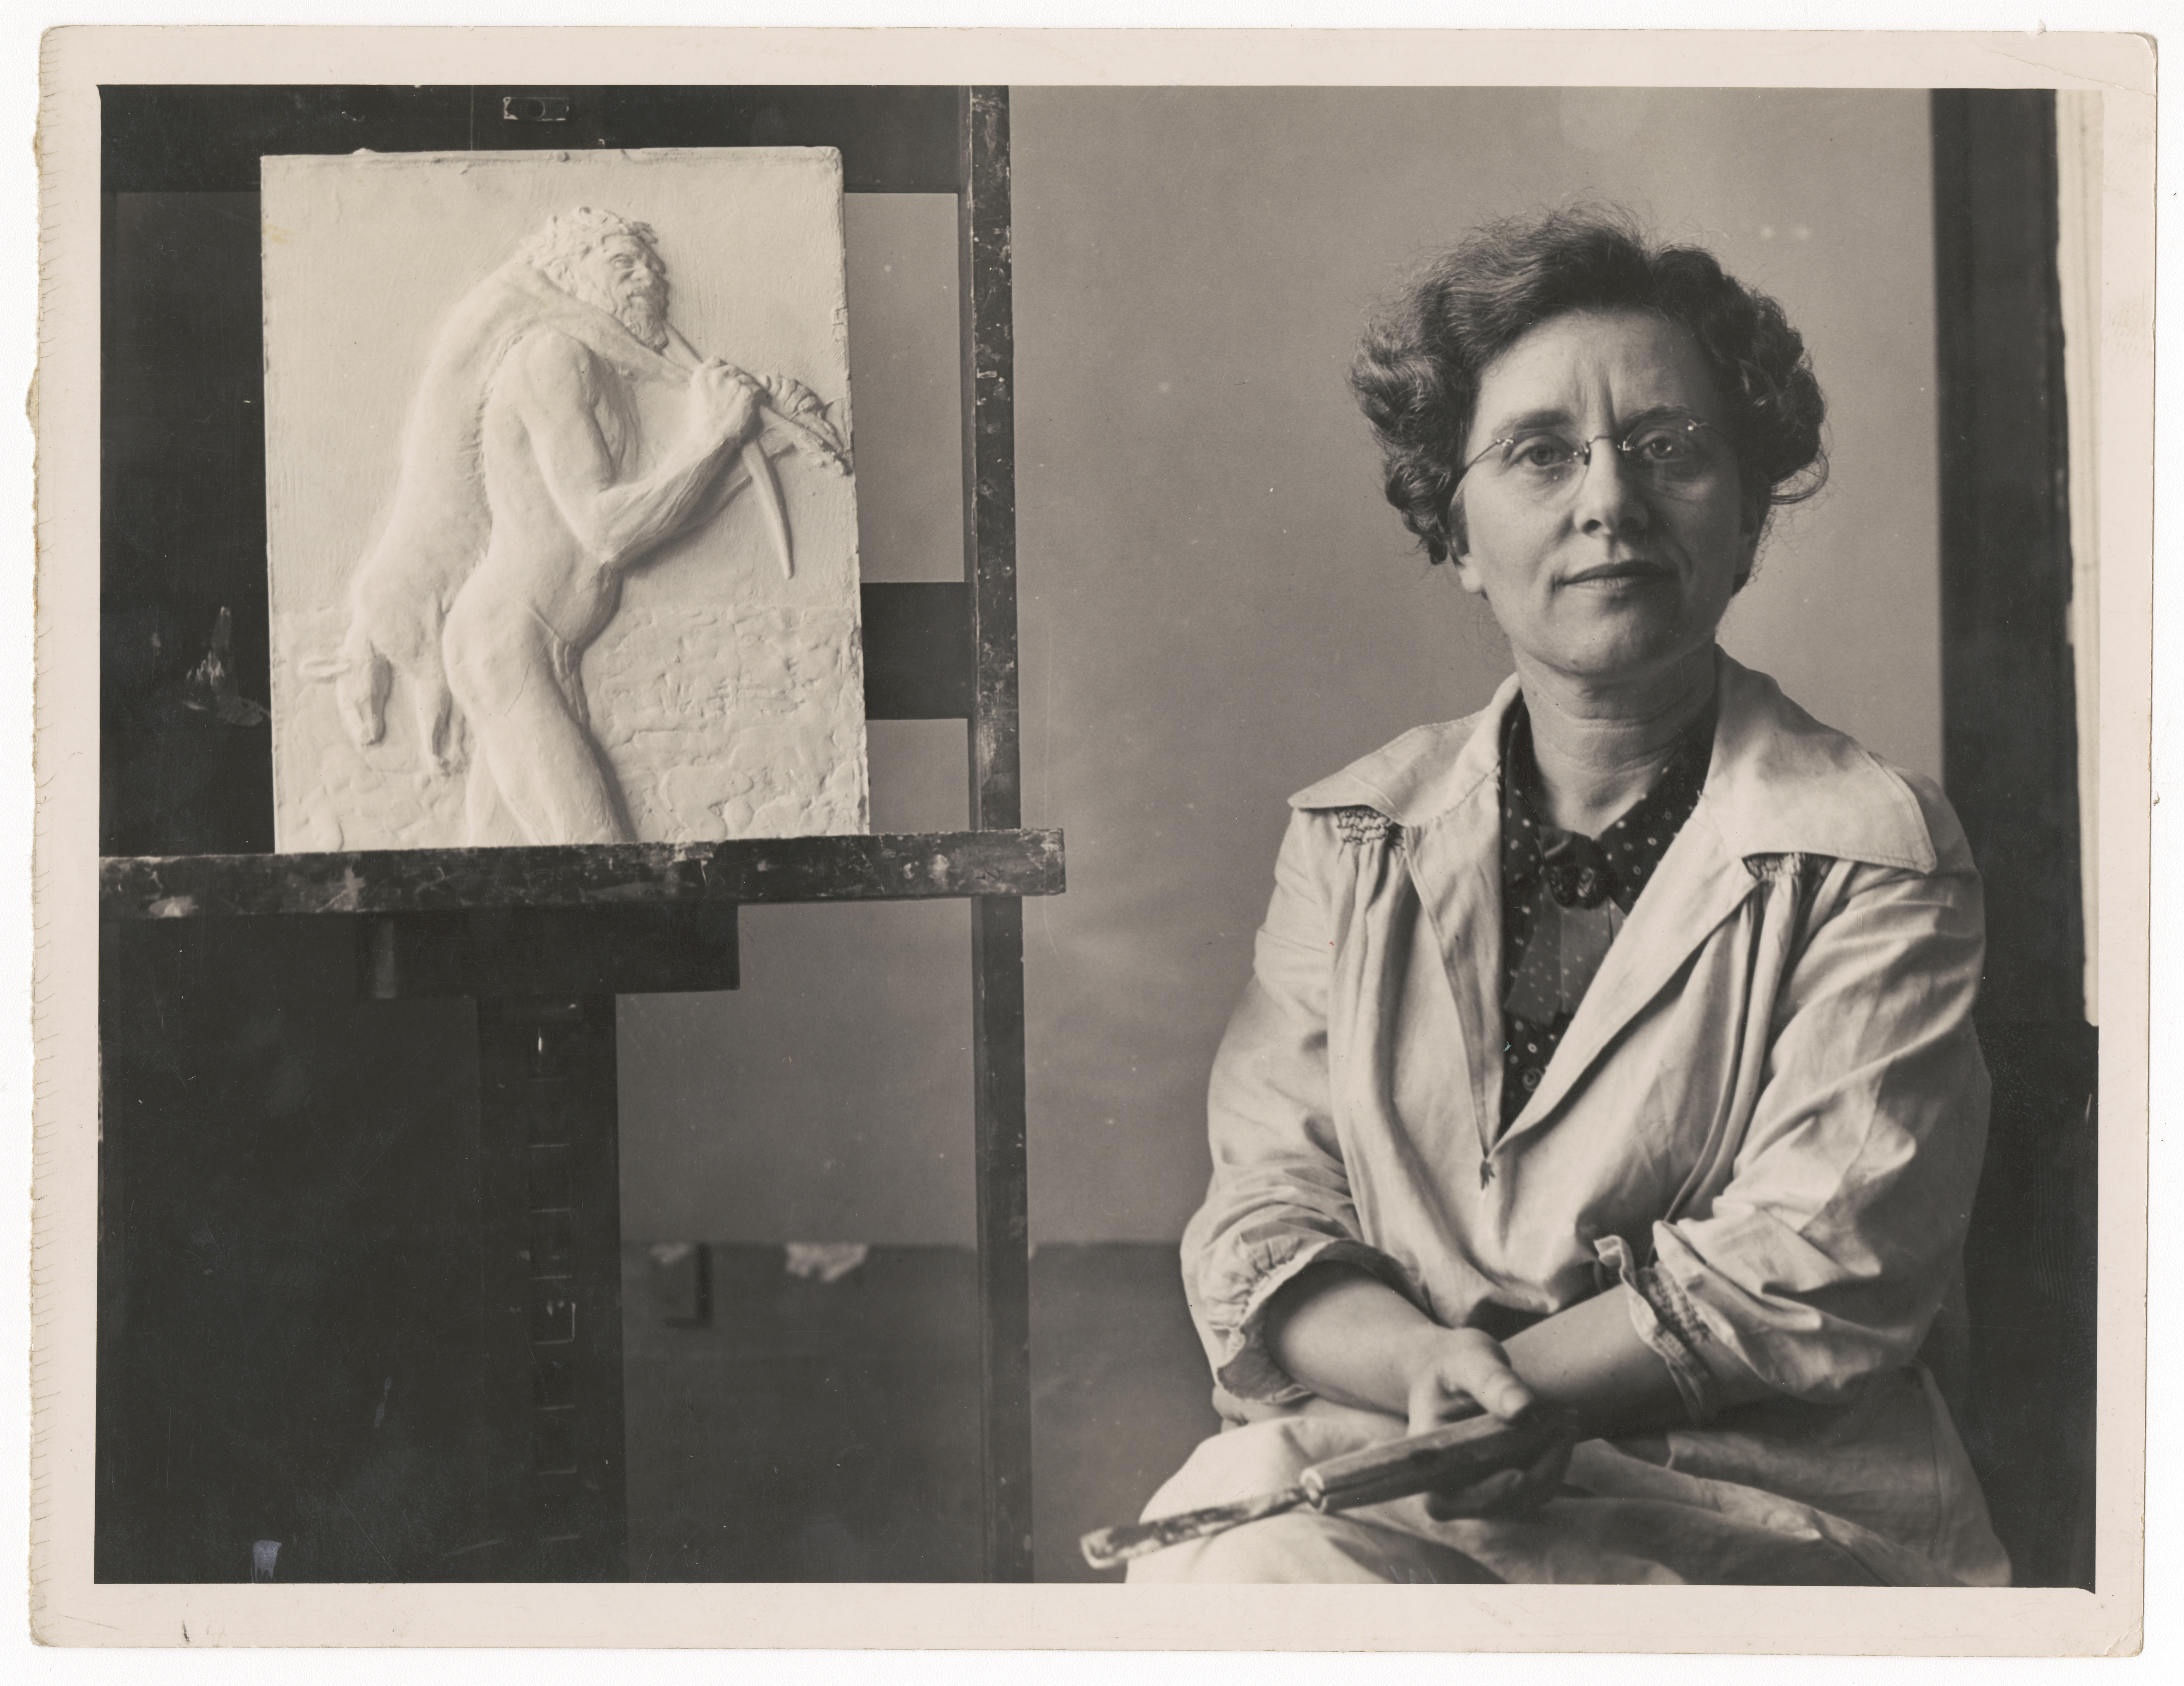 Daphne Mayo sitting in her studio, beside a panel for the east doors of the Public Library of New South Wales